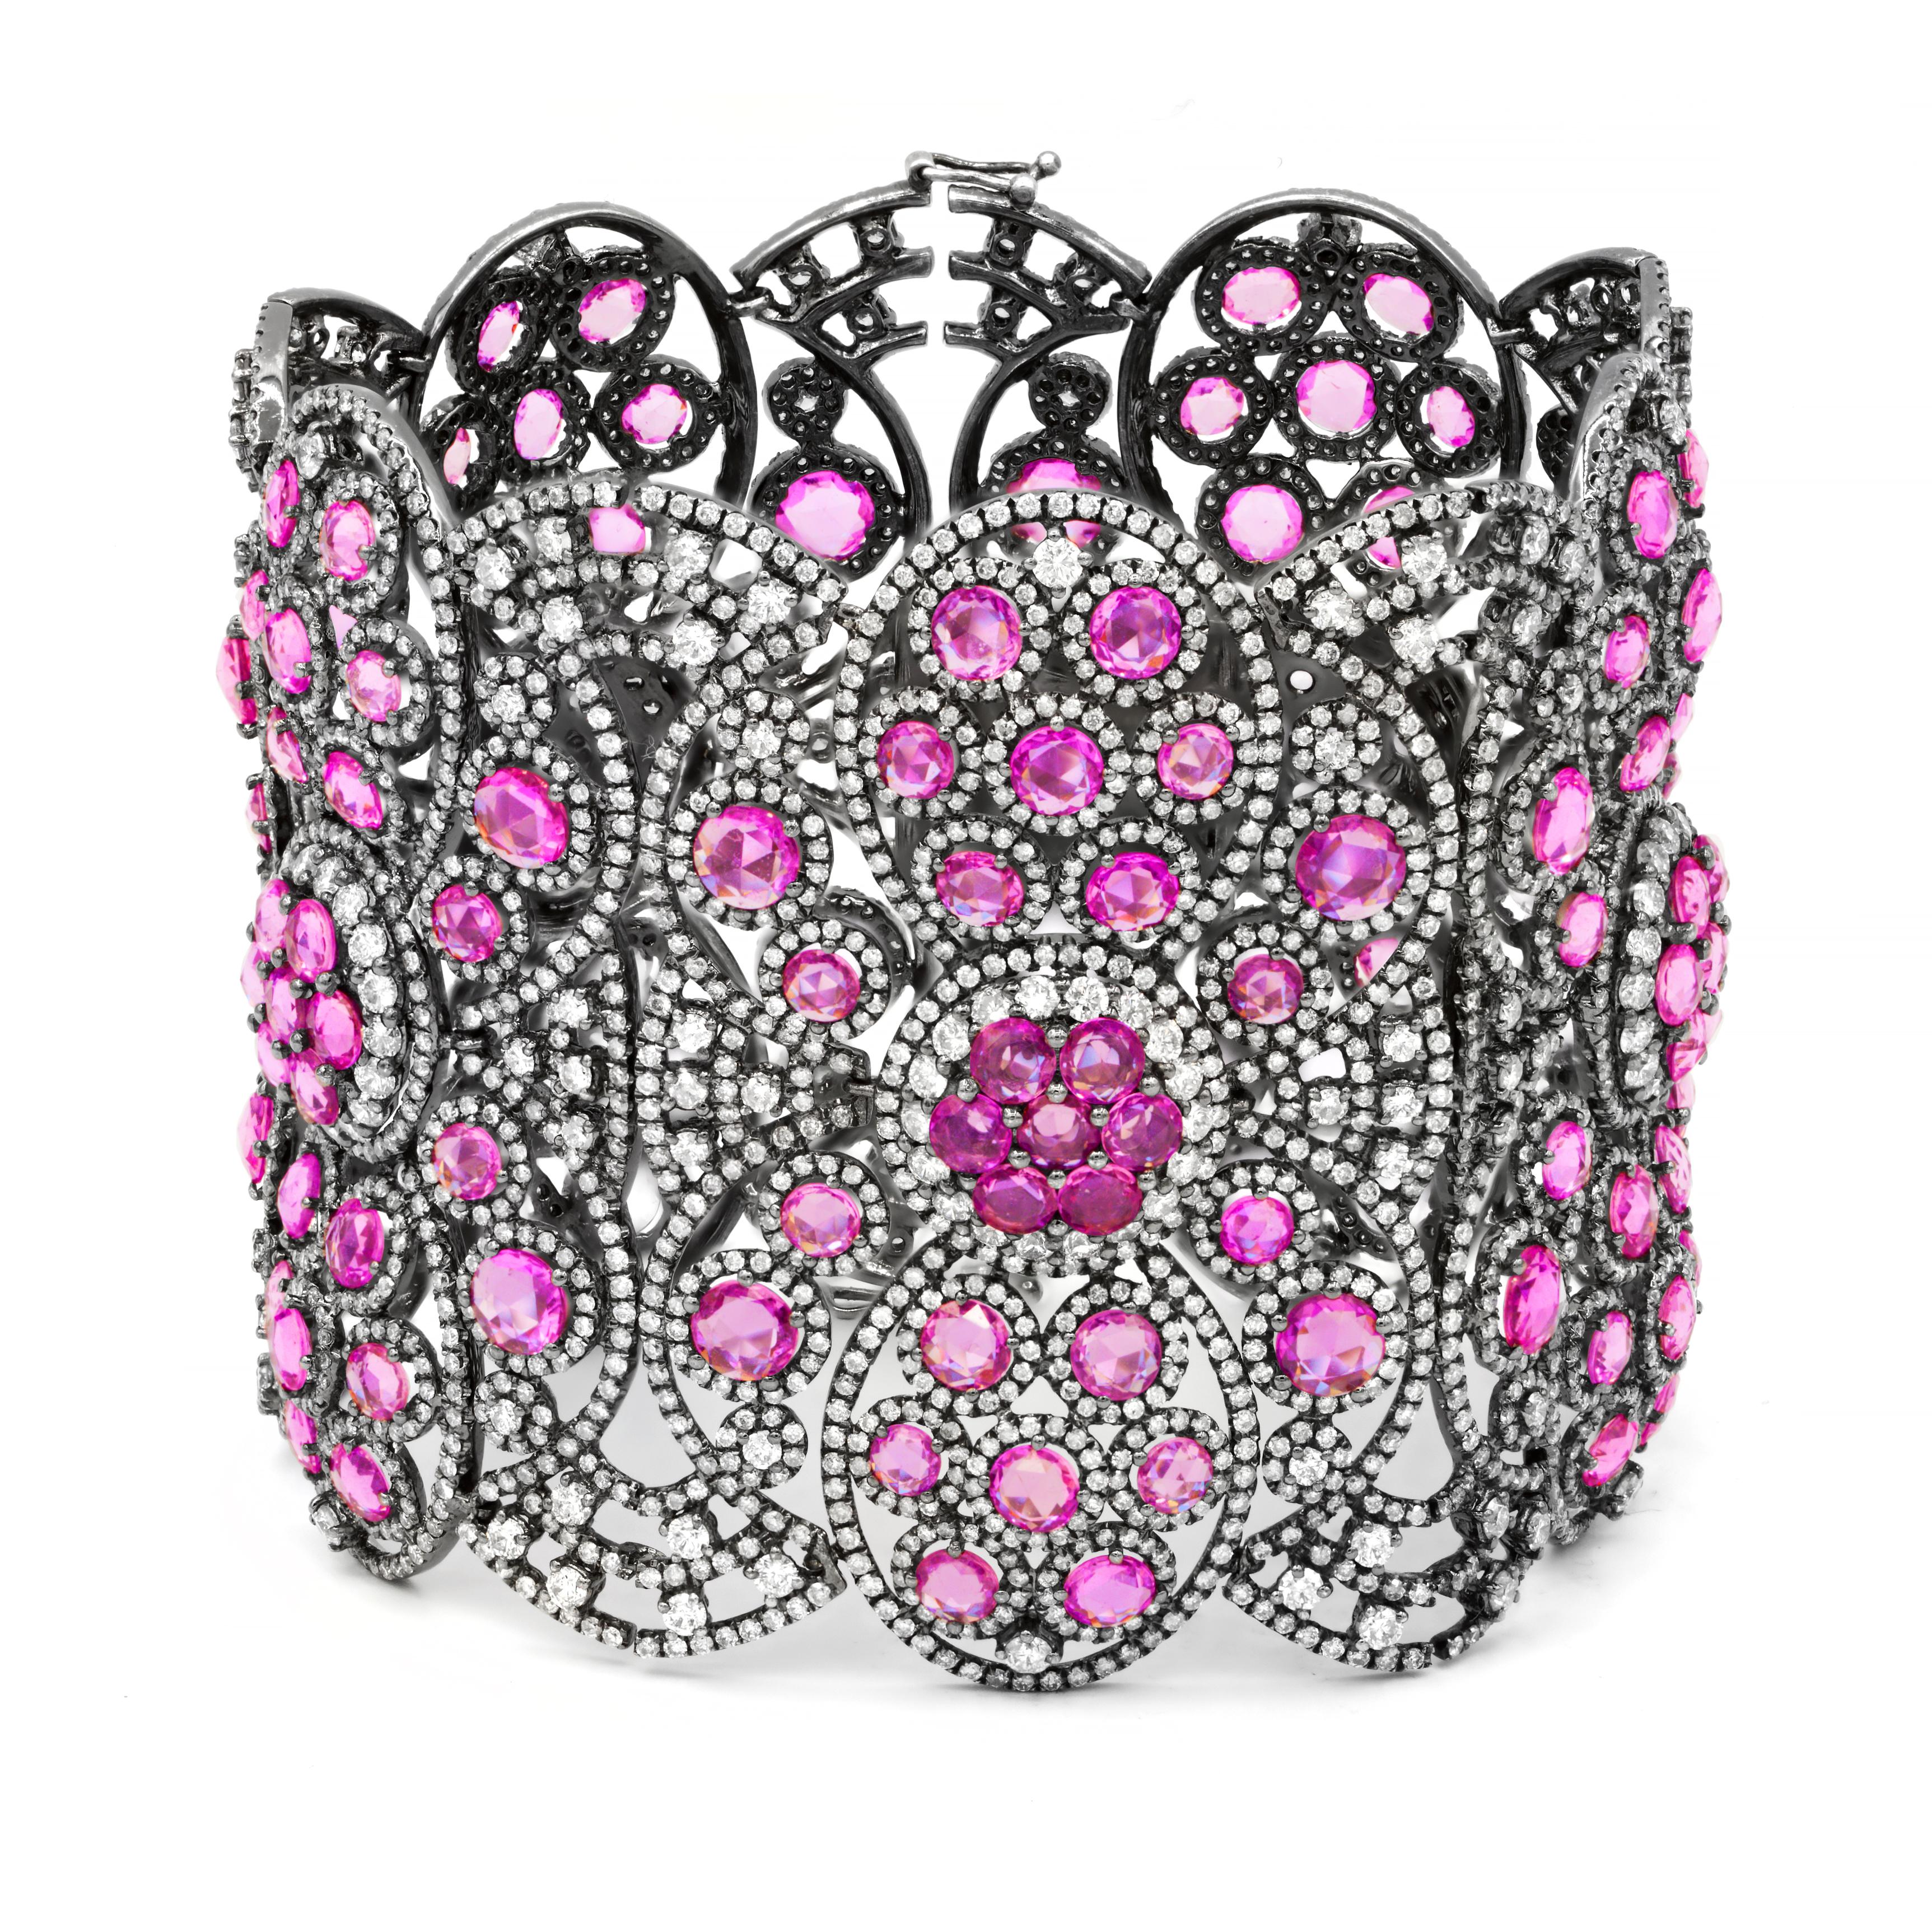 Hand made antique style soft bangle bracelet. 
Absolutely magnificent Pink sapphire and diamond bracet with black rhodium that makes combination of pink sapphires and diamonds pop. 
34.32 Carats of Natural Pink Sapphires set with 24.95 Carats of